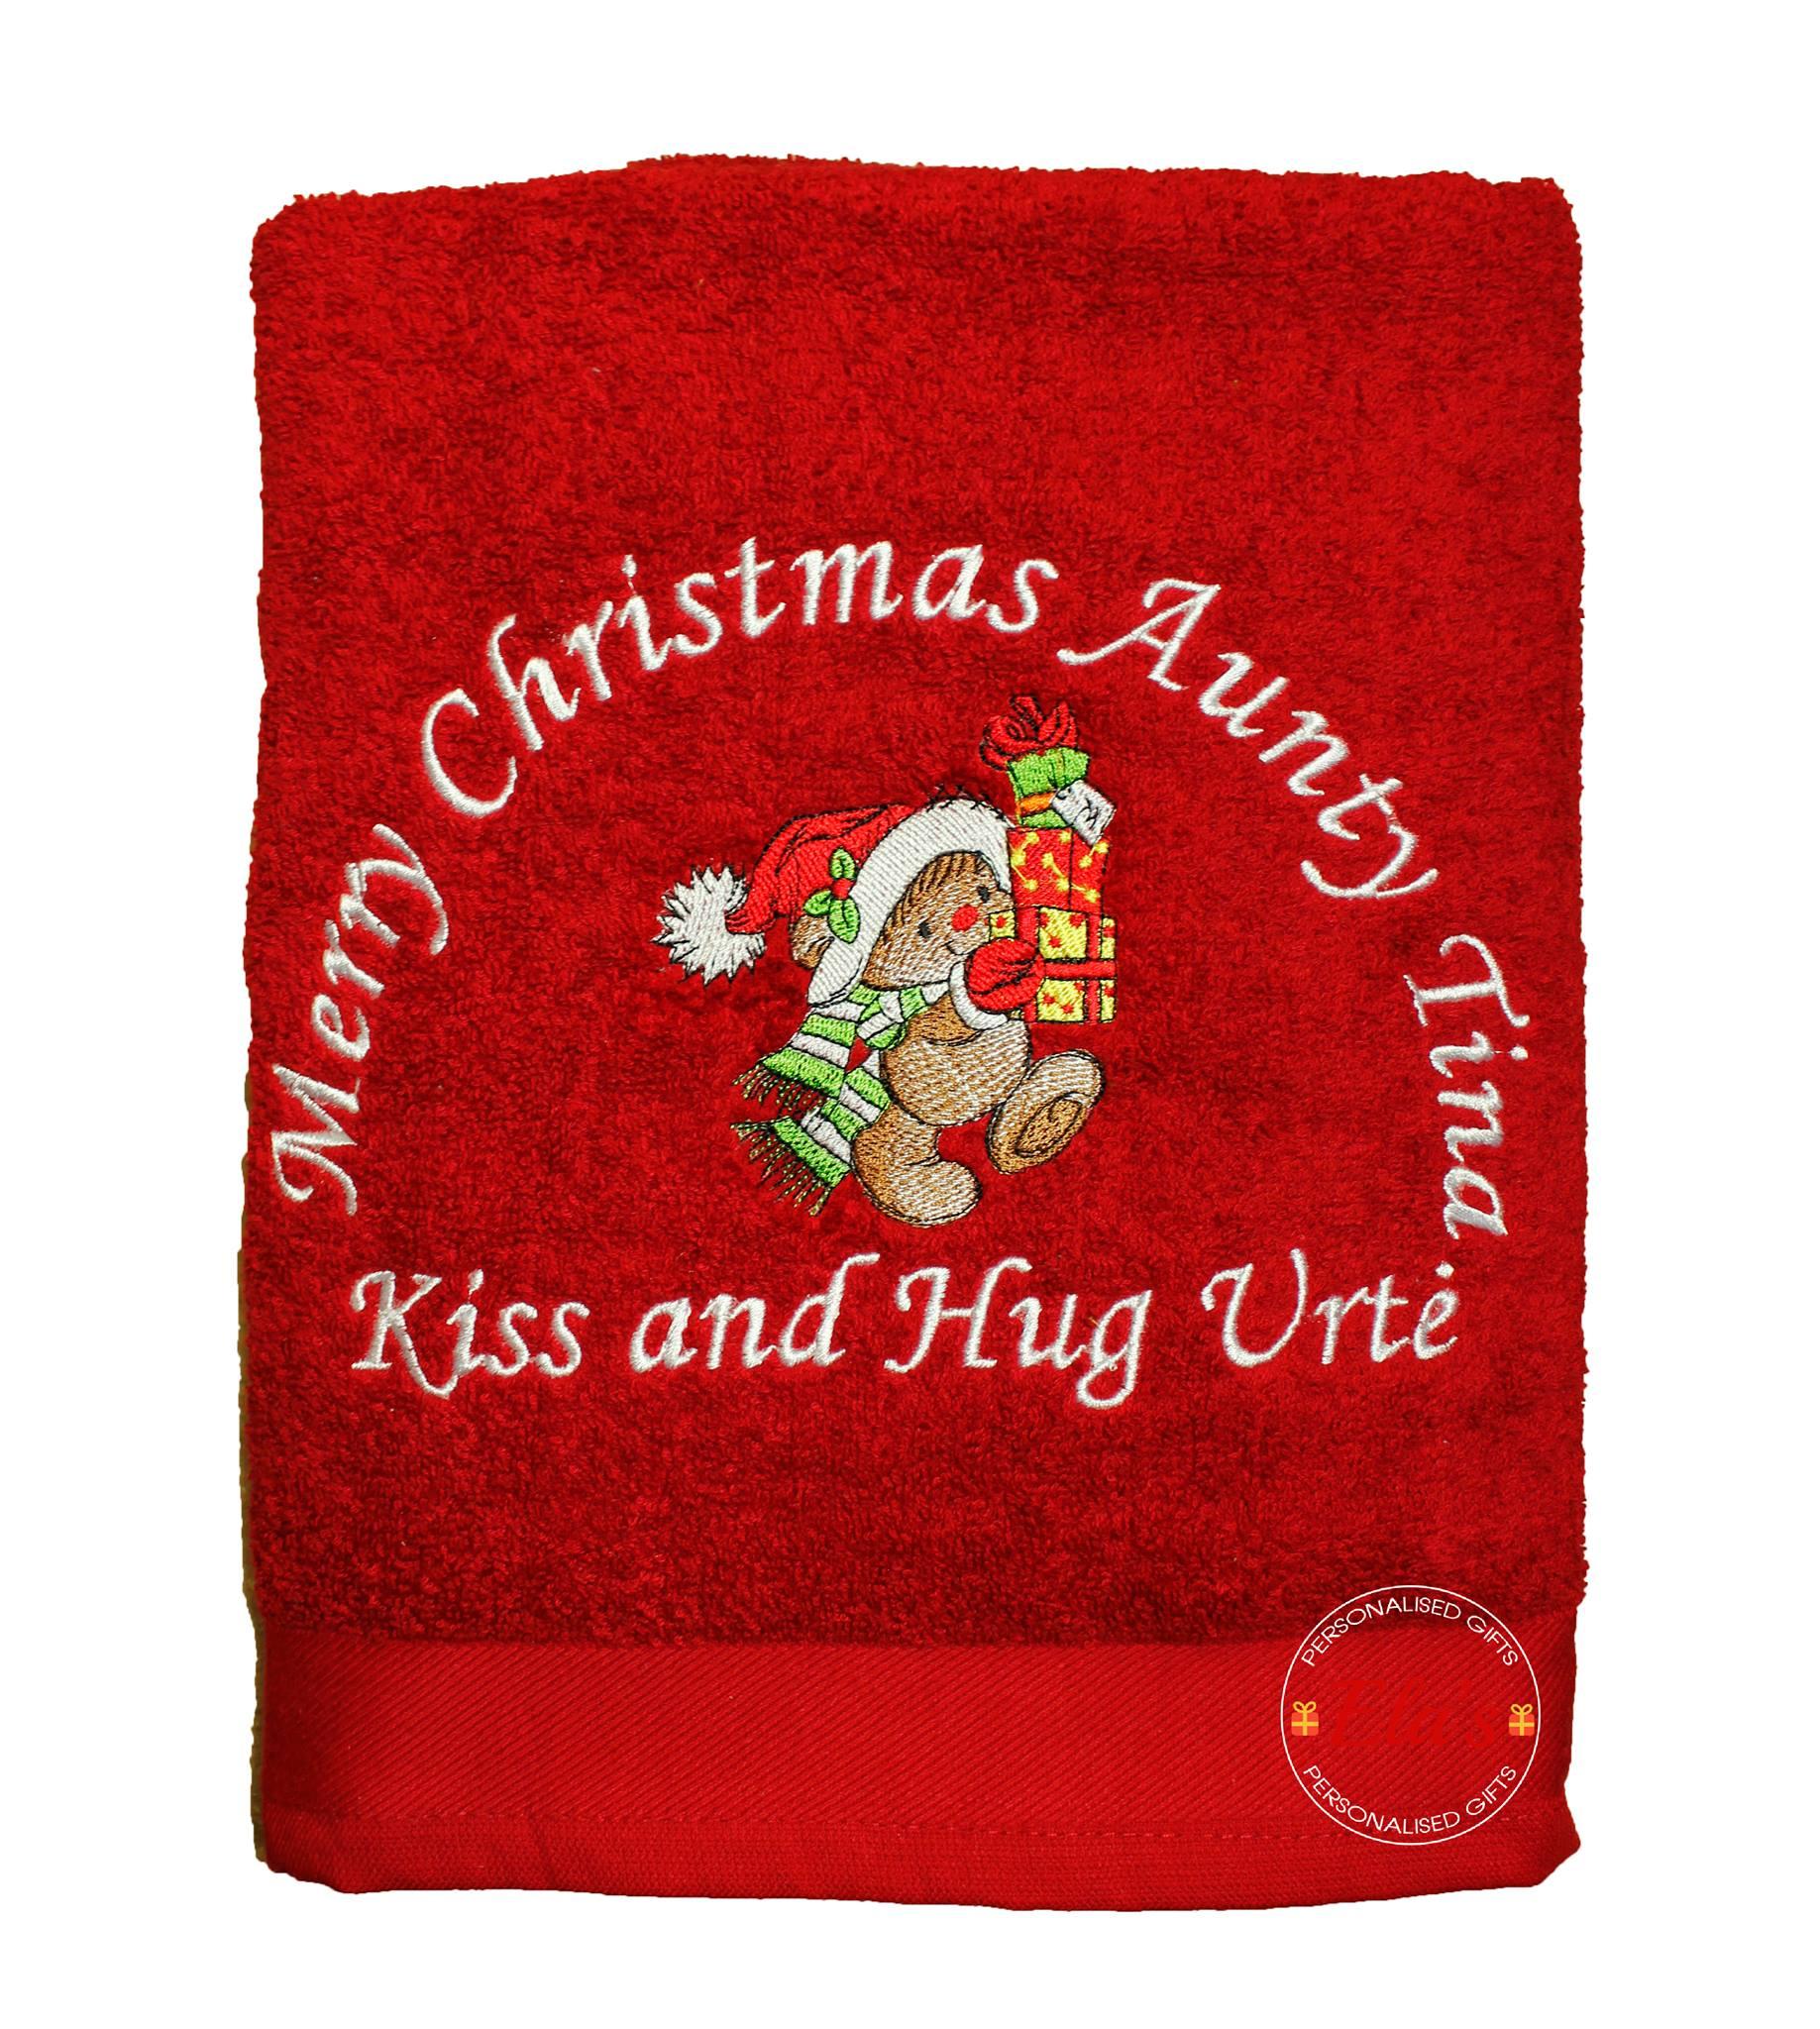 Embroidered towel with Christmas gifts design